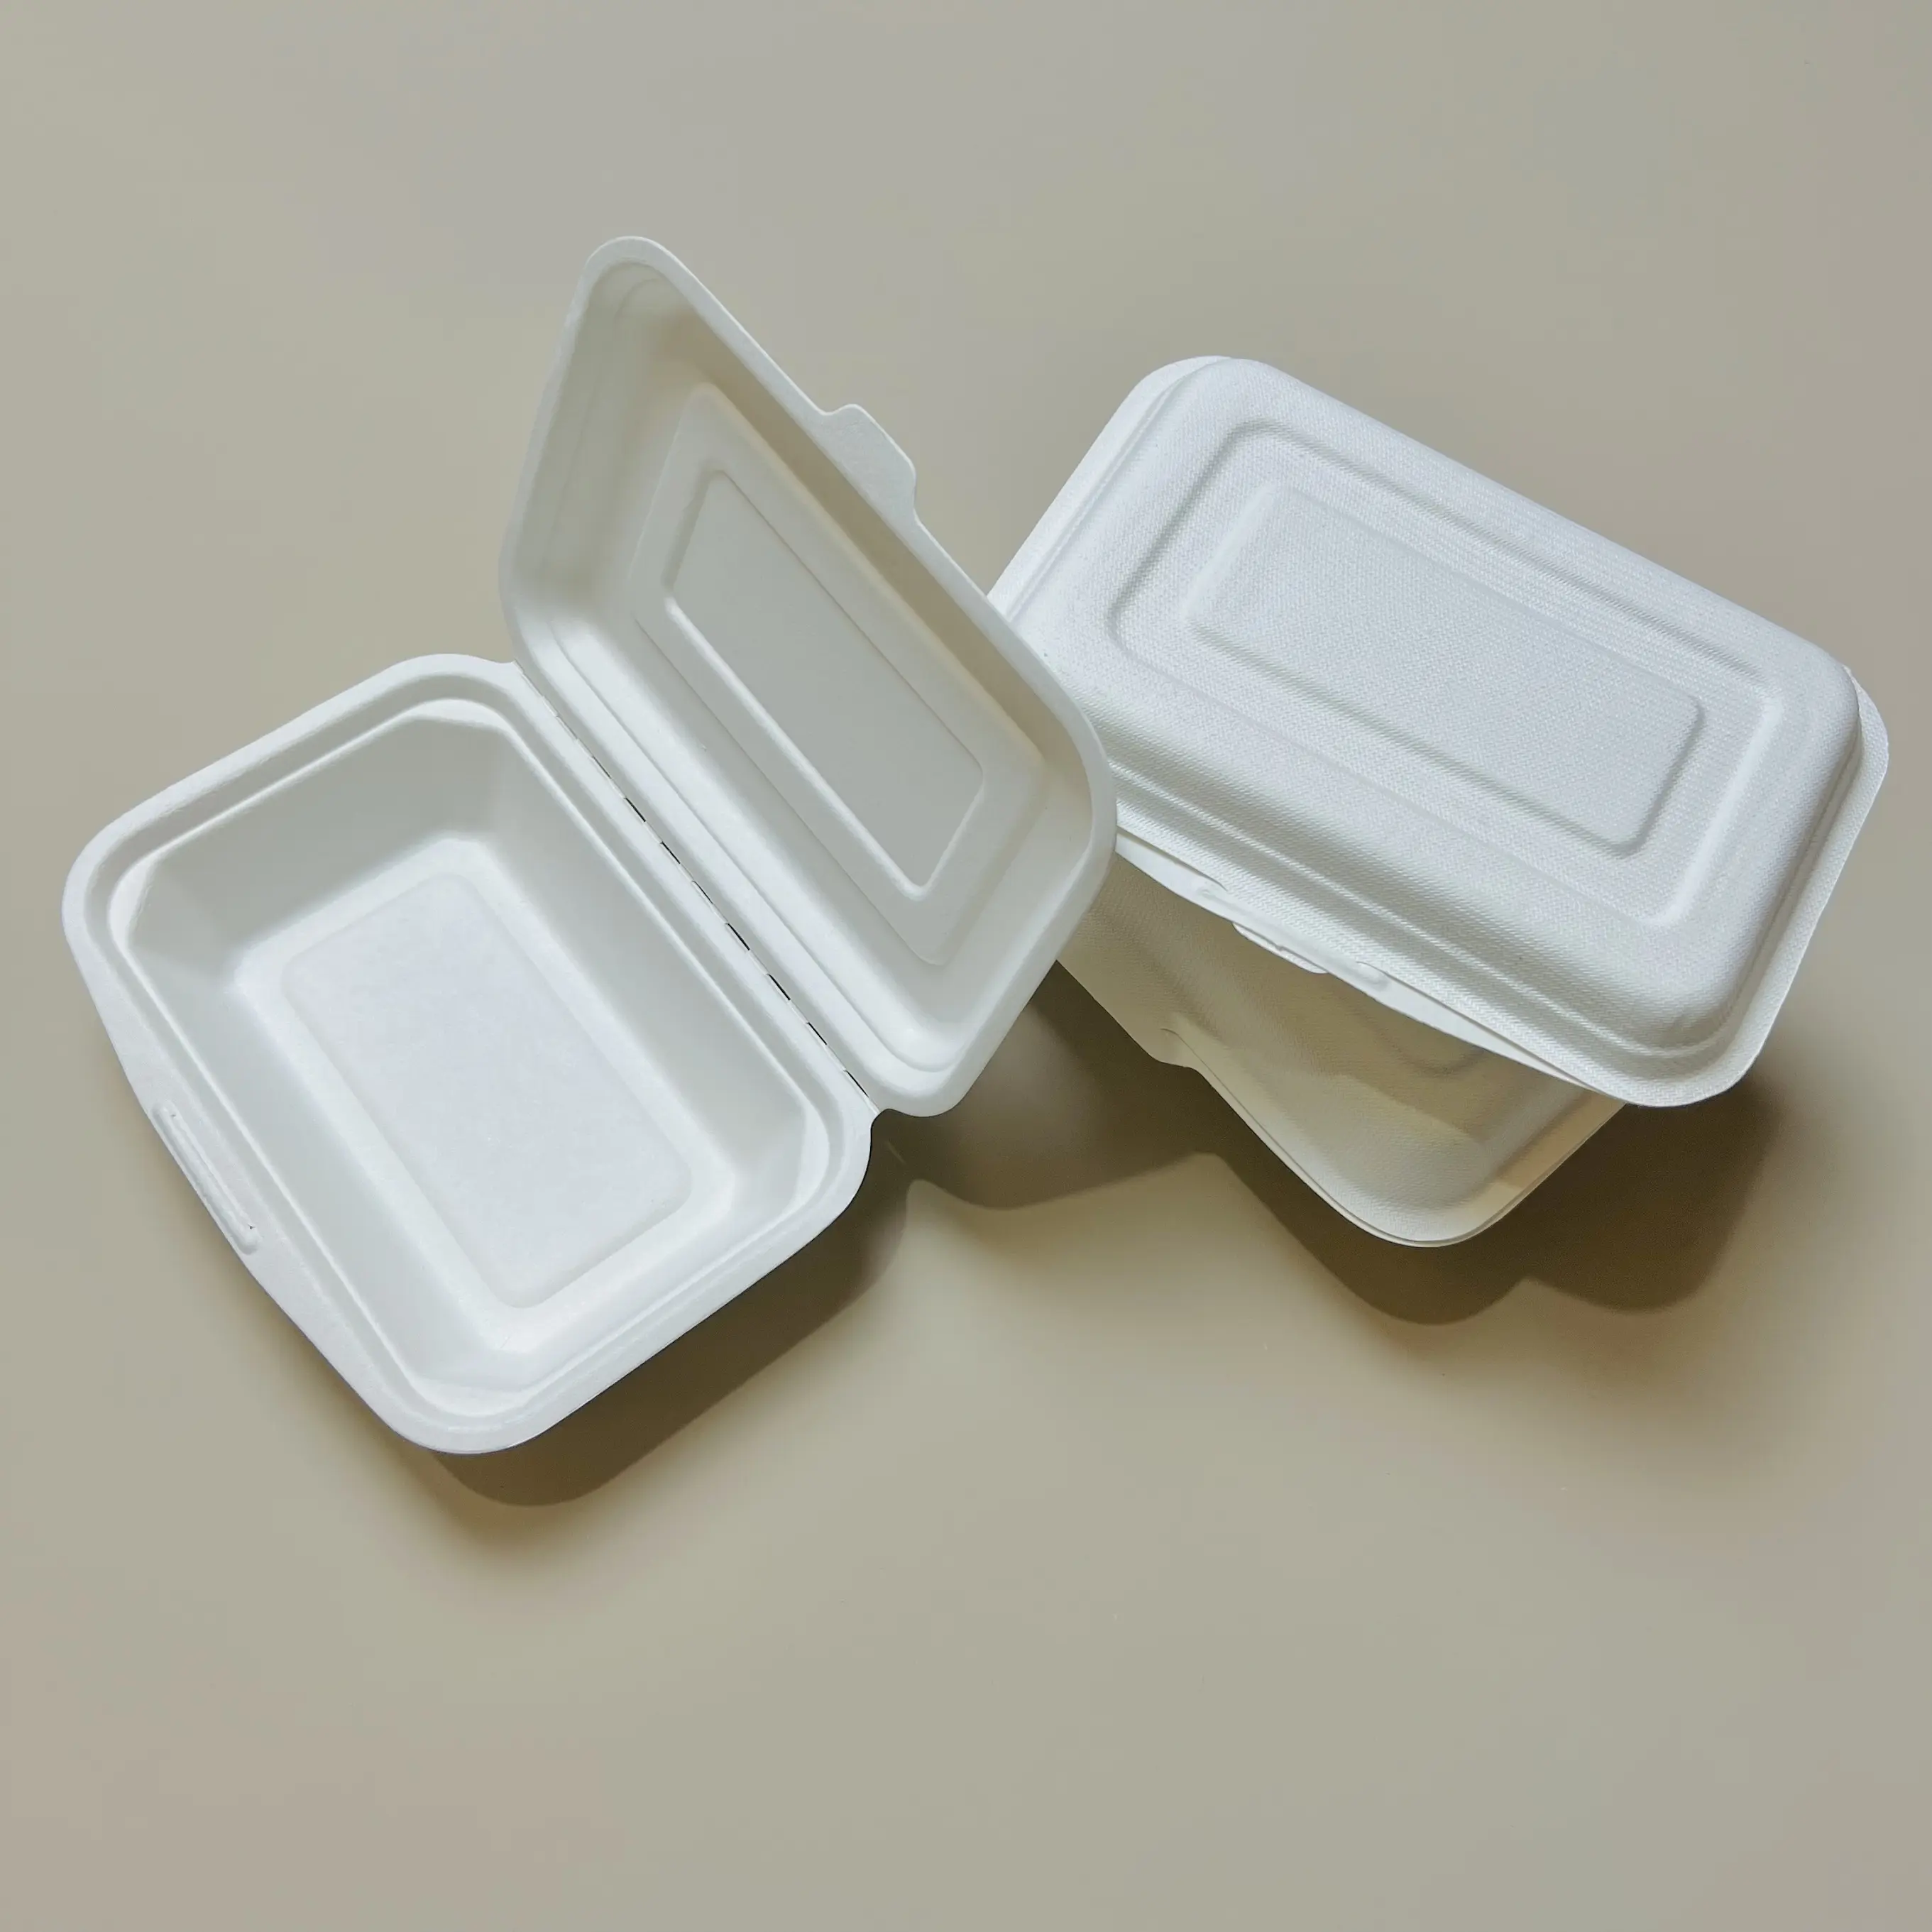 Customizable 9" x 6" Heatable Greaseproof Fast Food Lock Box Sugarcane Bagasse 100% Biodegradable Lunch clamshell box